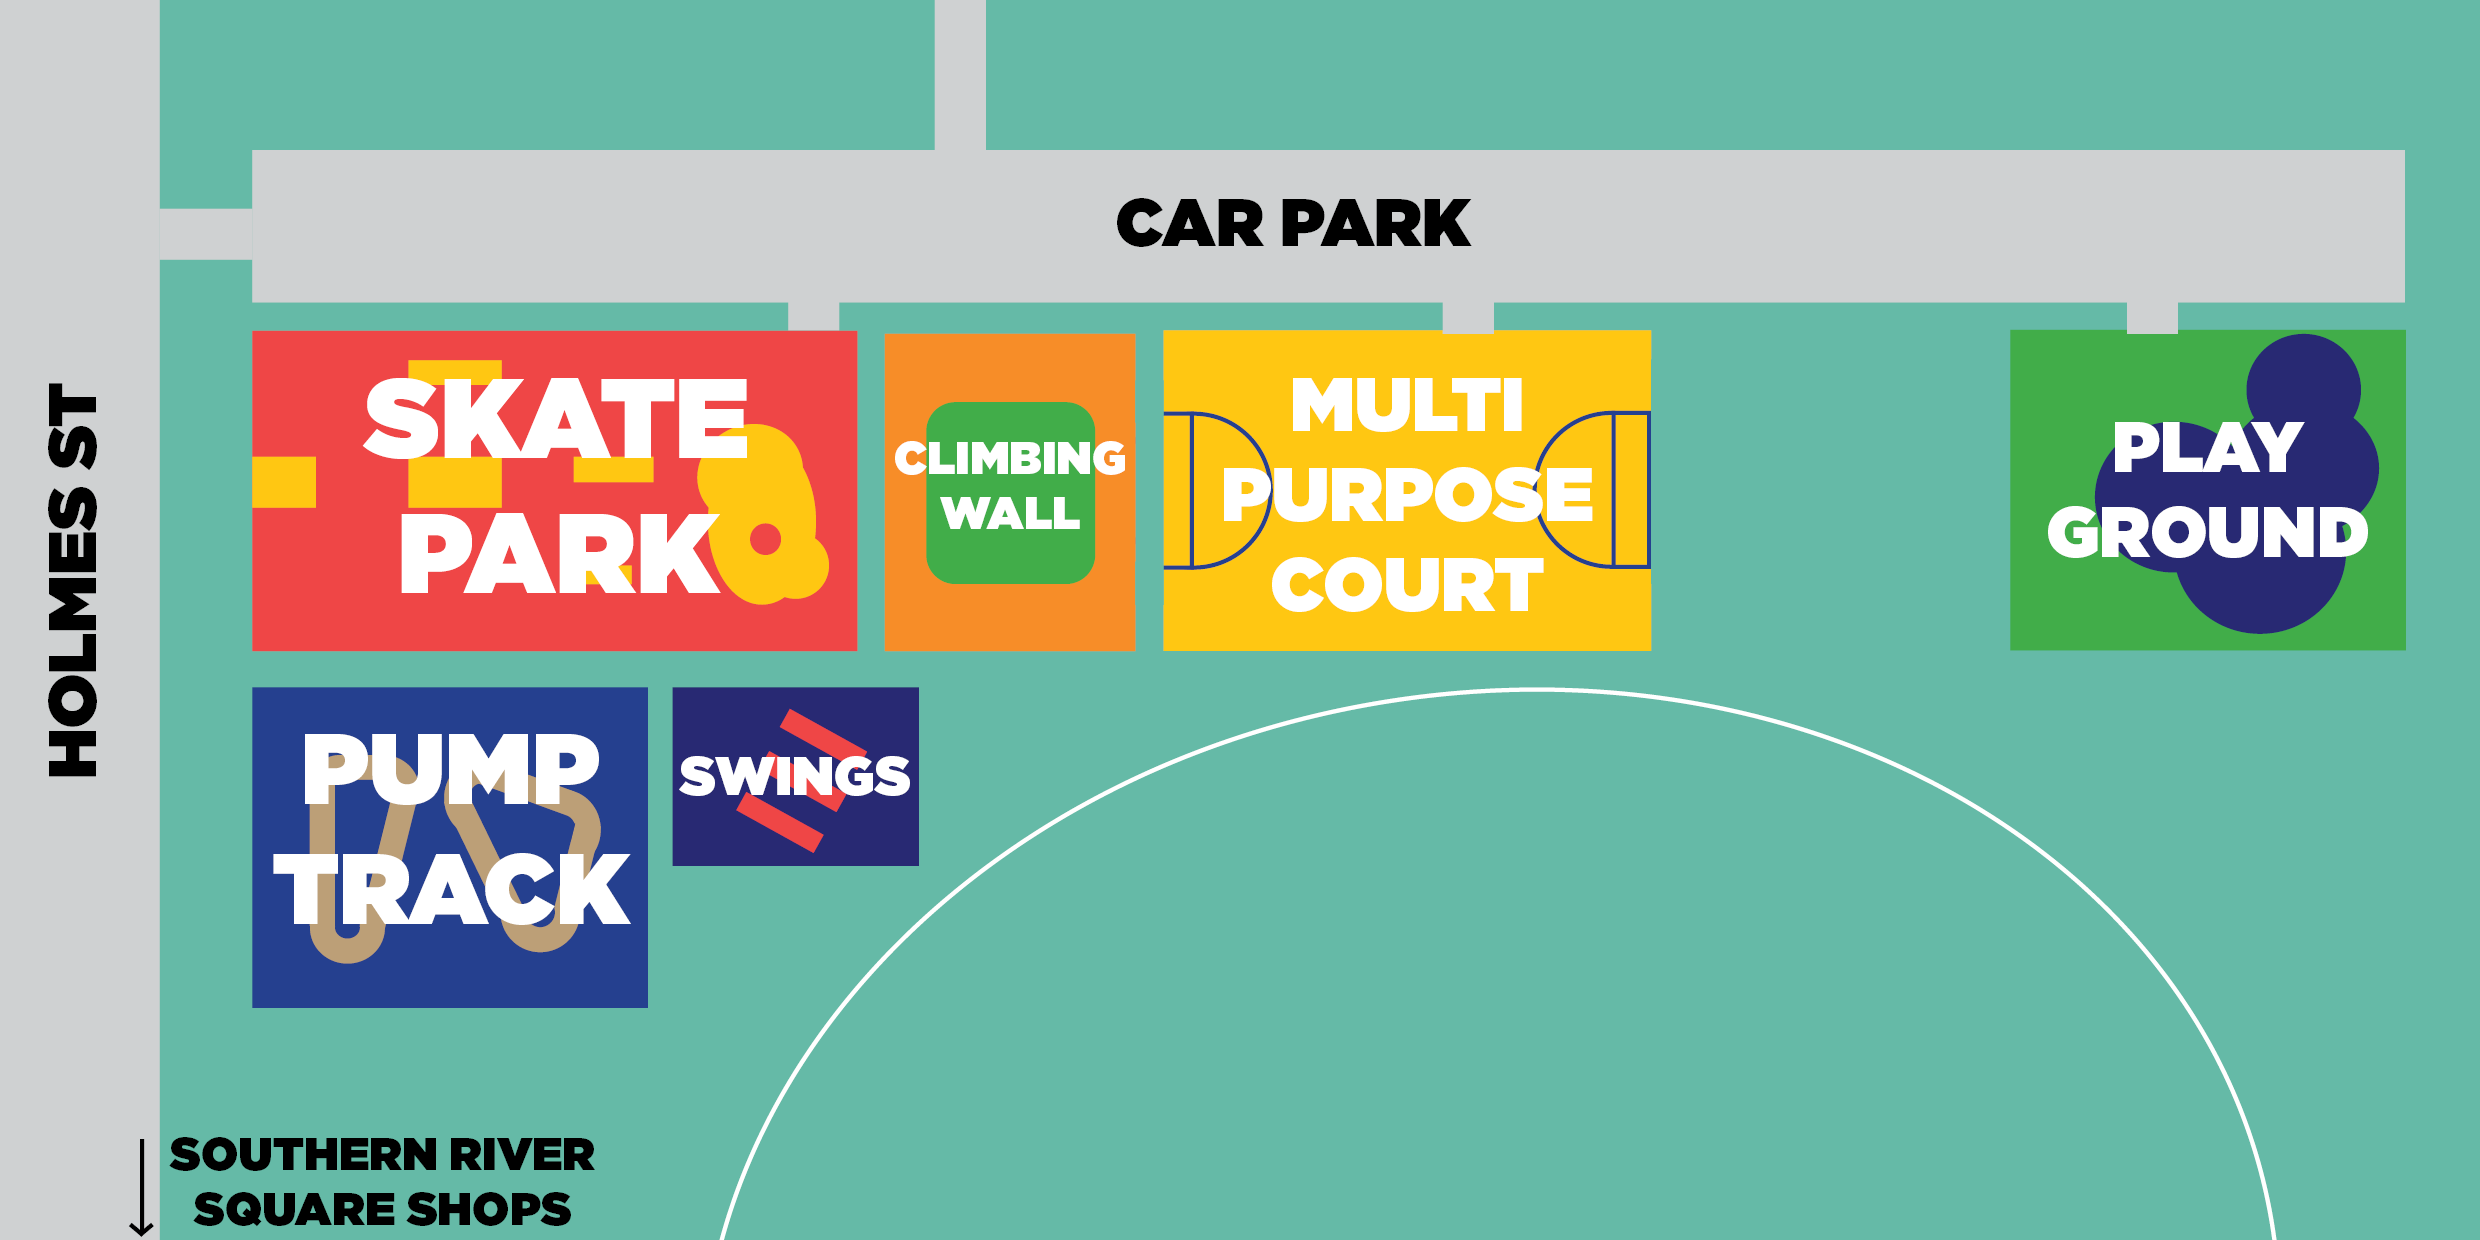 A map of the Youth Plaza area, with the pump track, skate park, climbing wall, multi-purpose court and play ground